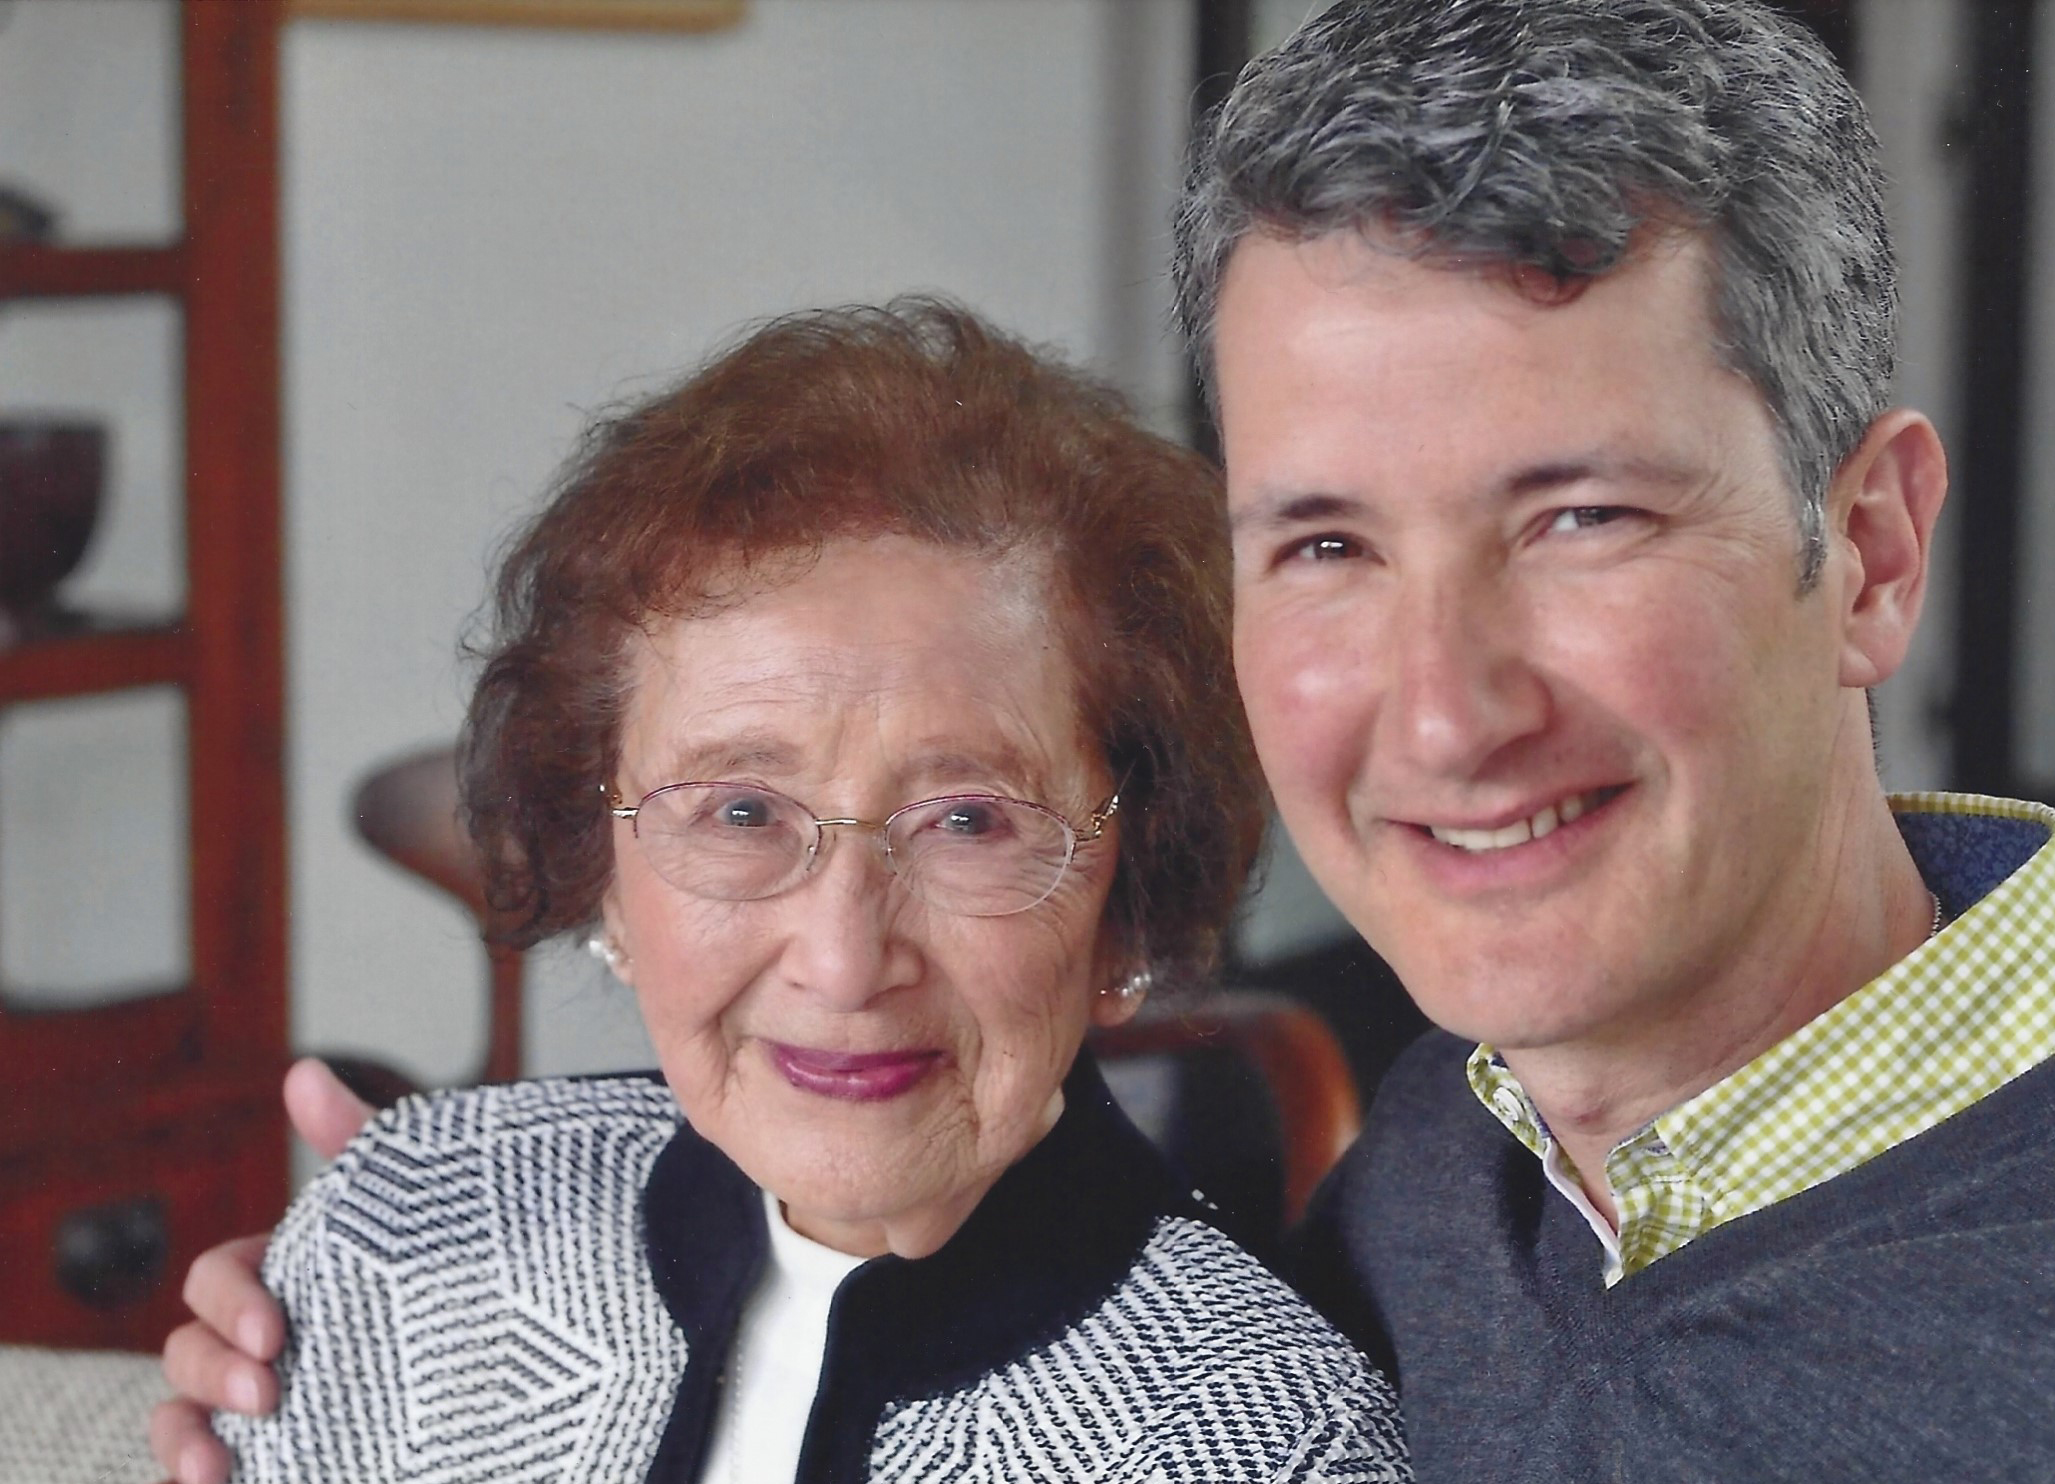 An elderly woman with glasses and a younger man smiling close together, likely family.